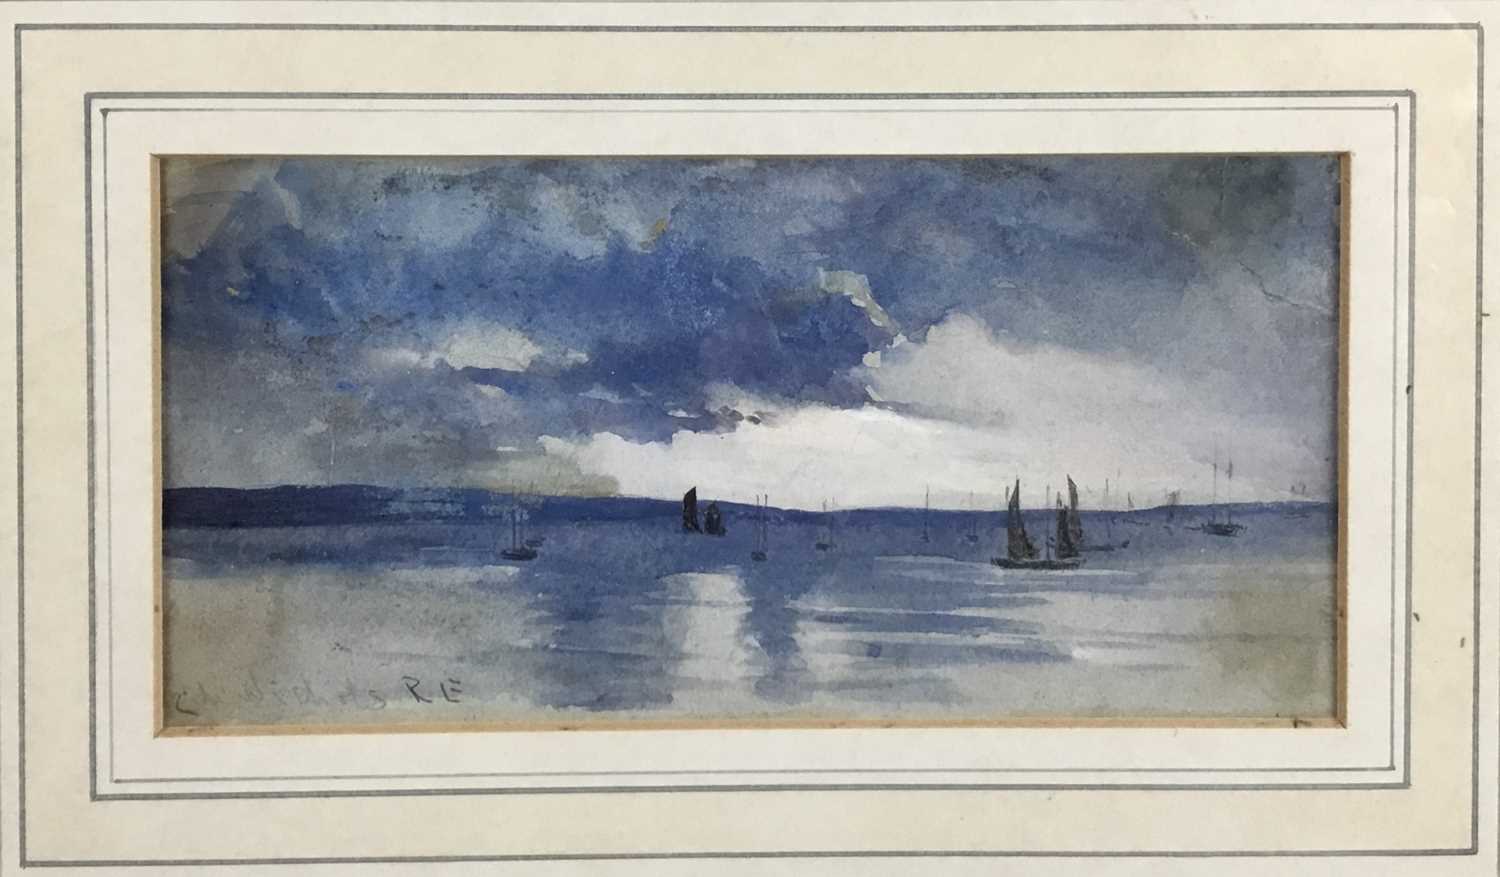 Lot 79 - C M Nichols, signed watercolour, marine scene, 18.5cm x 9cm together with a monochrome watercolour of shepherd in a landscape, 21.5cm x 16cm both mounted in glazed frames